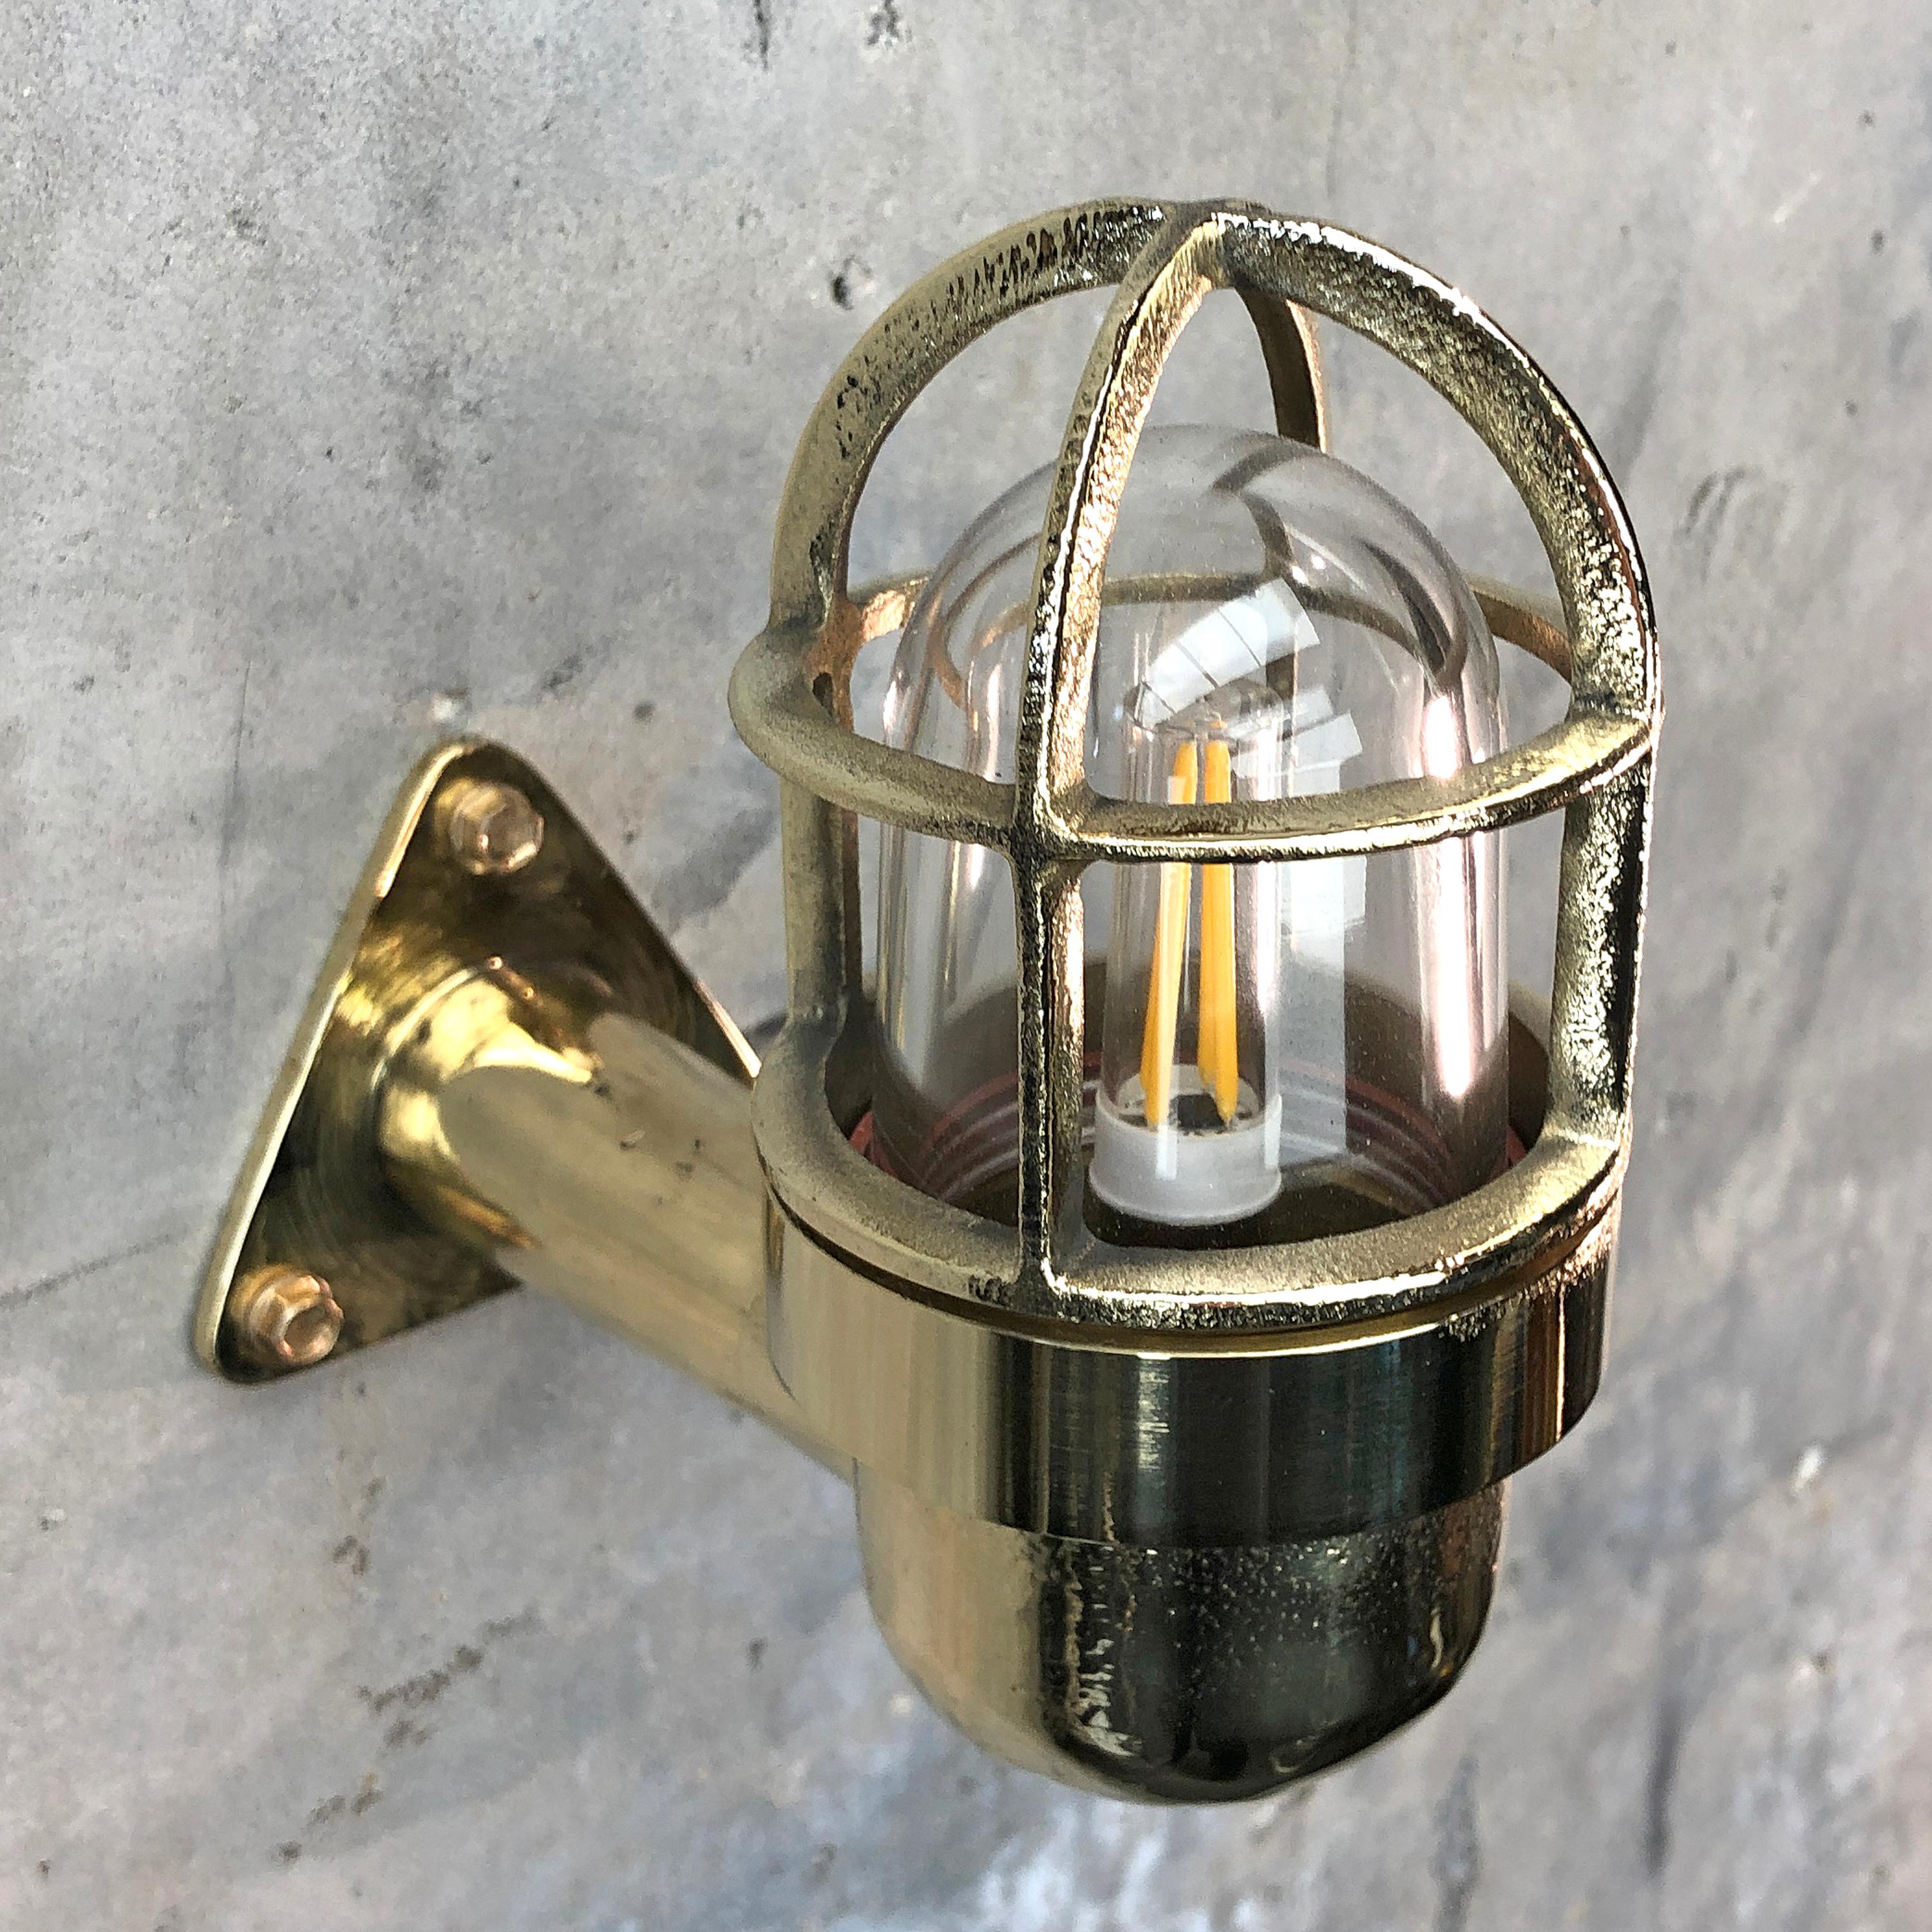 Tempered Late Century Small Industrial Brass Wall Light, Glass Dome, Cage, Edison Bulb